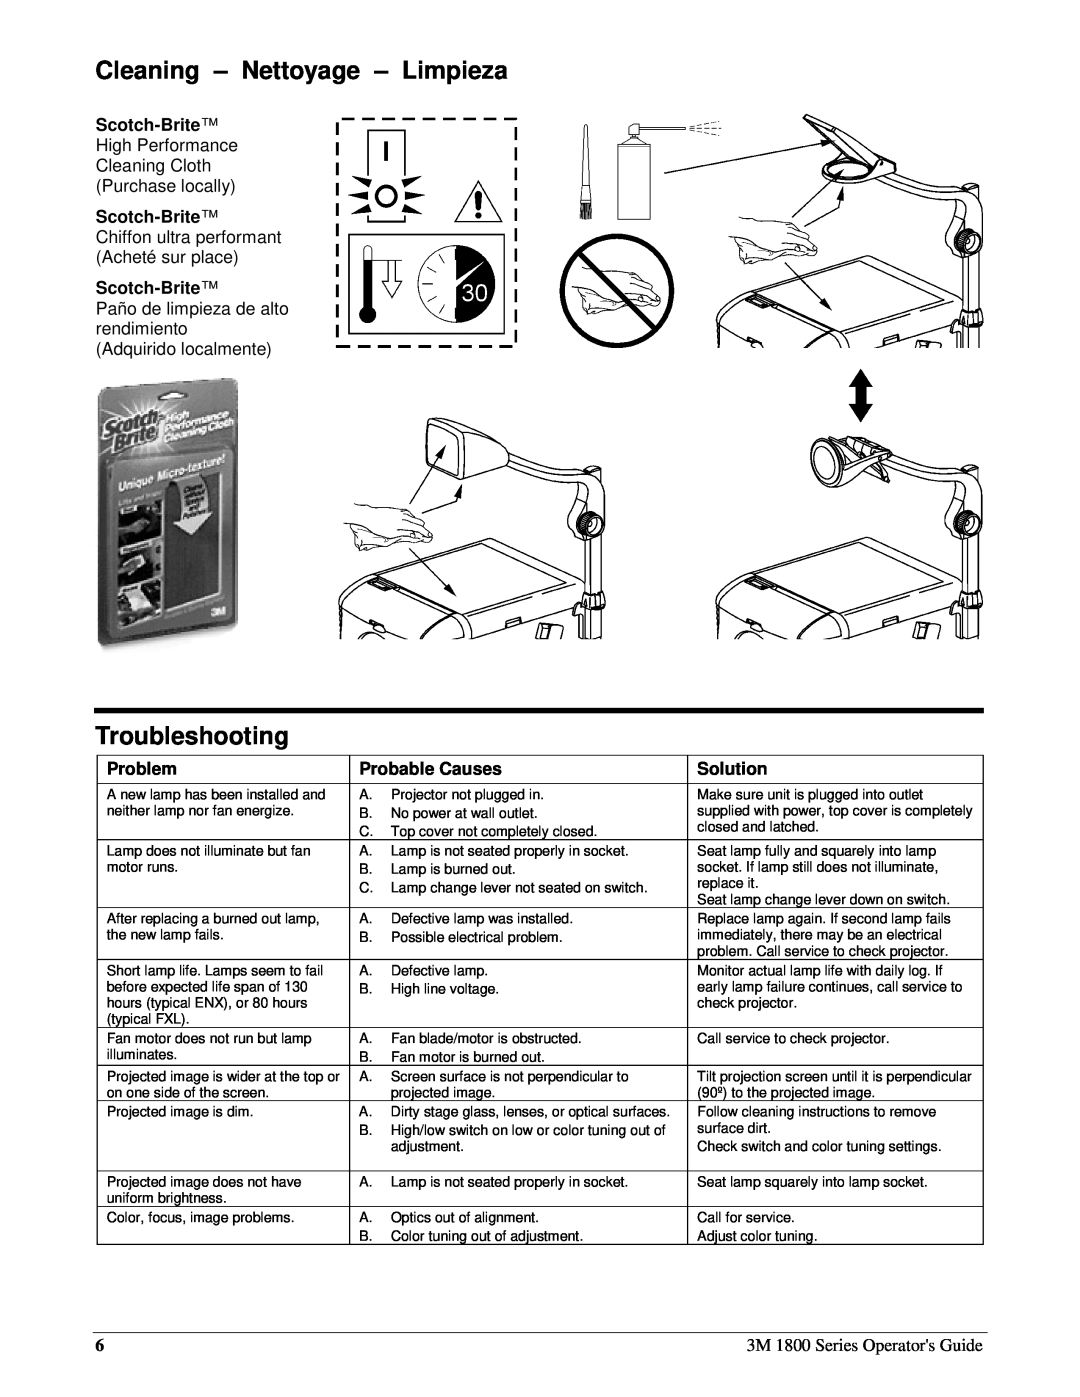 3M 1800 Series manual Cleaning - Nettoyage - Limpieza, Troubleshooting, Scotch-Brite, Problem, Probable Causes, Solution 